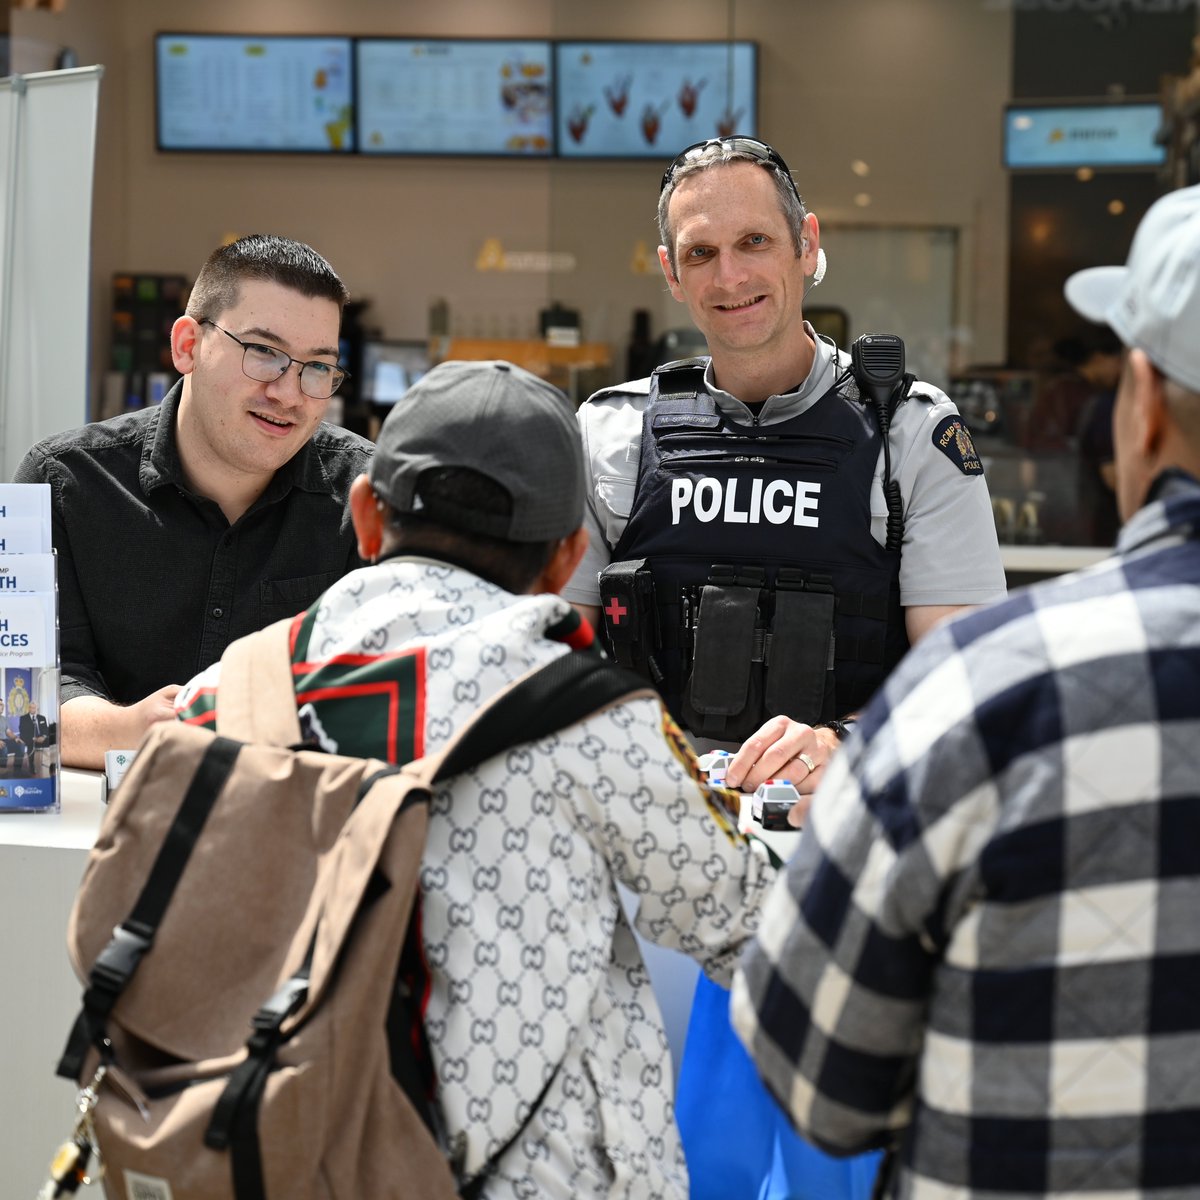 We had some great discussions today about community safety and supporting people impacted by crime during our #VictimsWeek info session at Metrotown. Thanks to everyone who stopped by to speak with officers and staff from across the Burnaby RCMP. #VictimsAndSurvivorsOfCrimeWeek